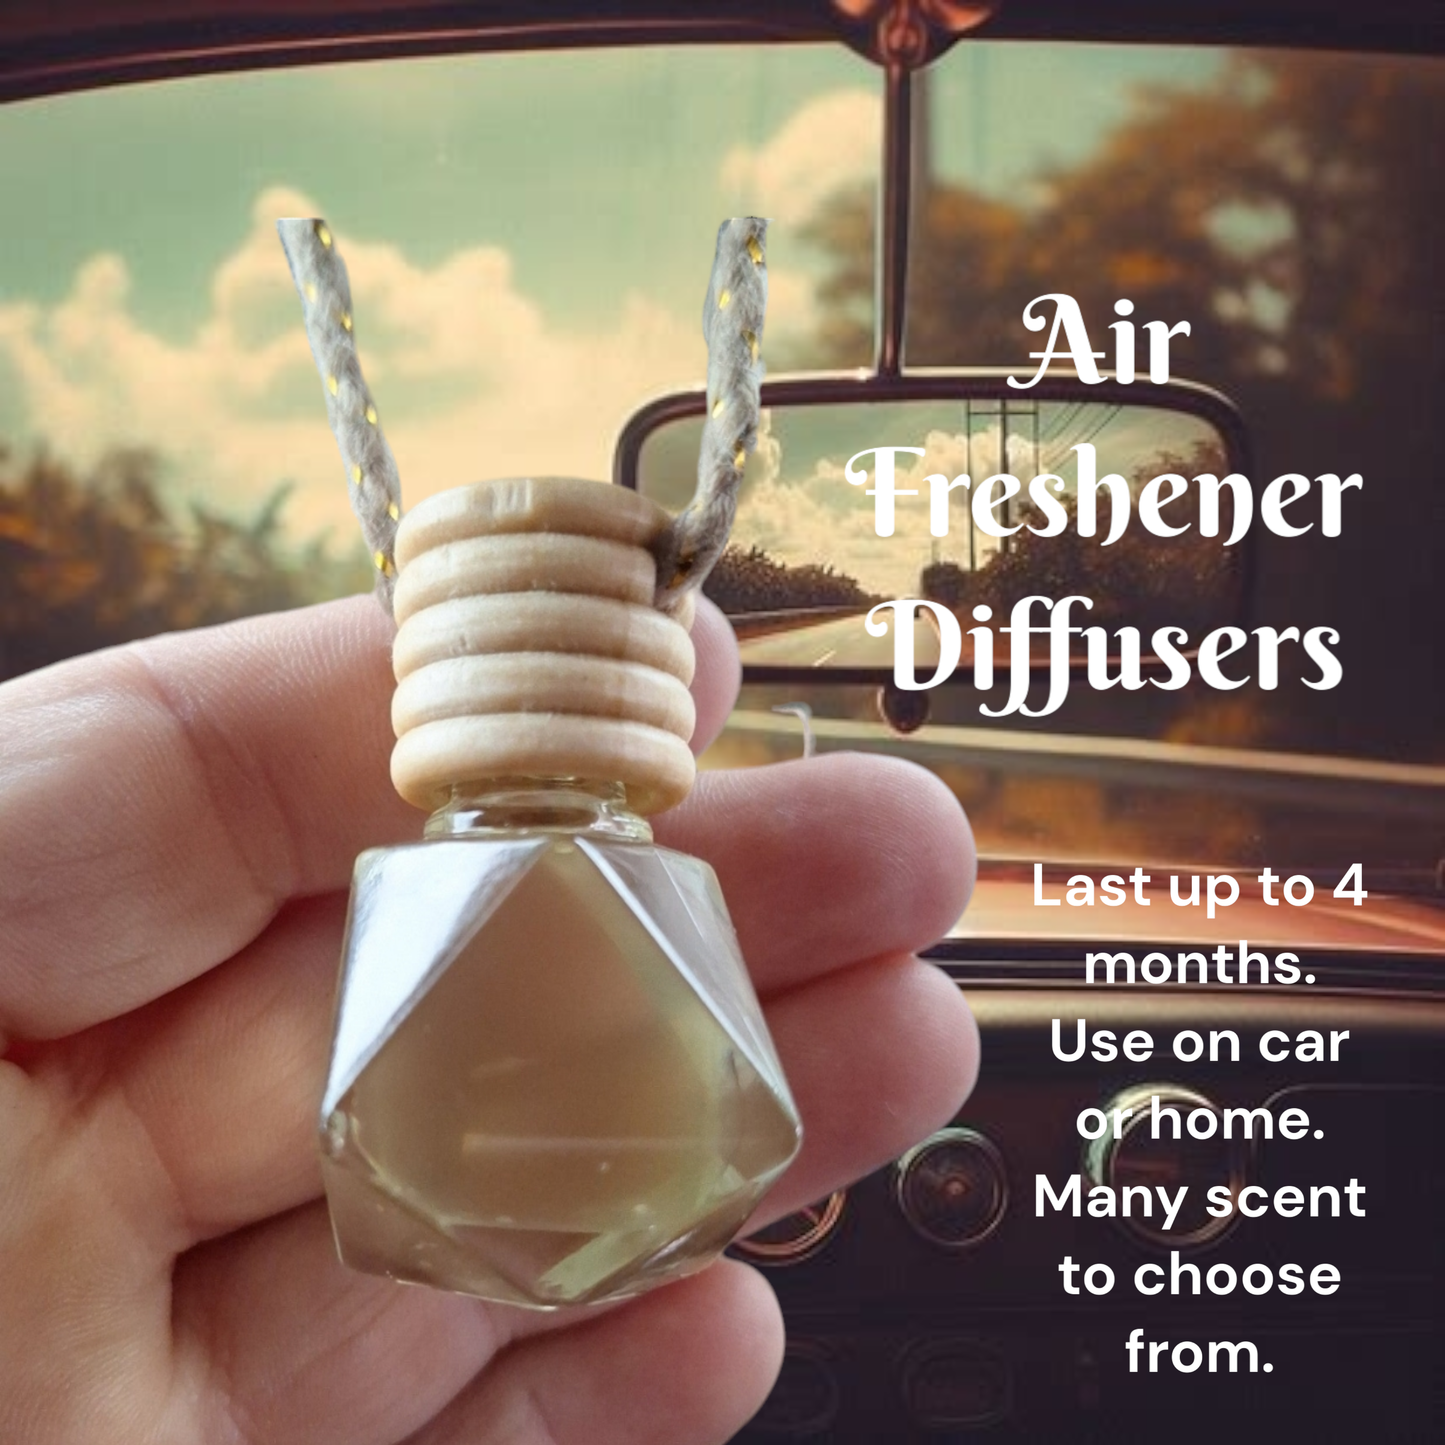 Chocolate Covered Cherry Air Freshener Diffuser for your car or home.